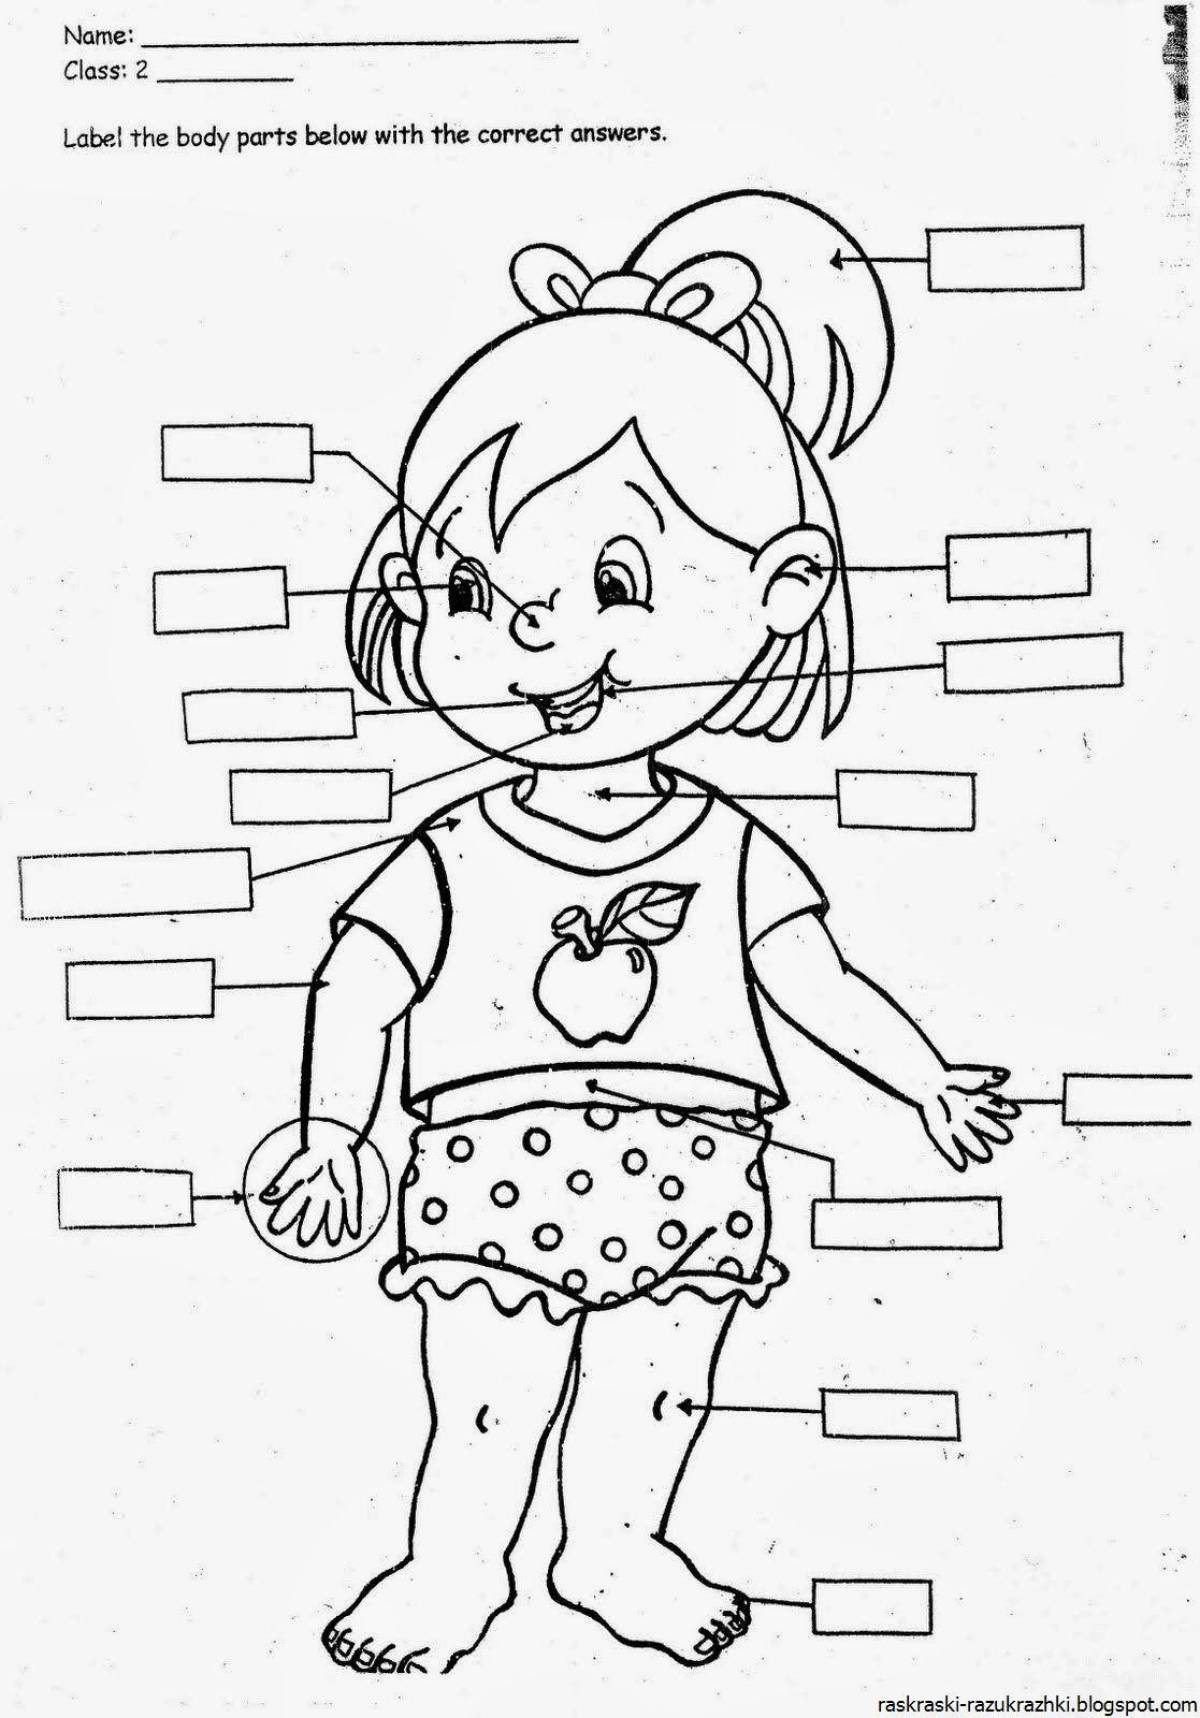 Colorful human body coloring page for juniors